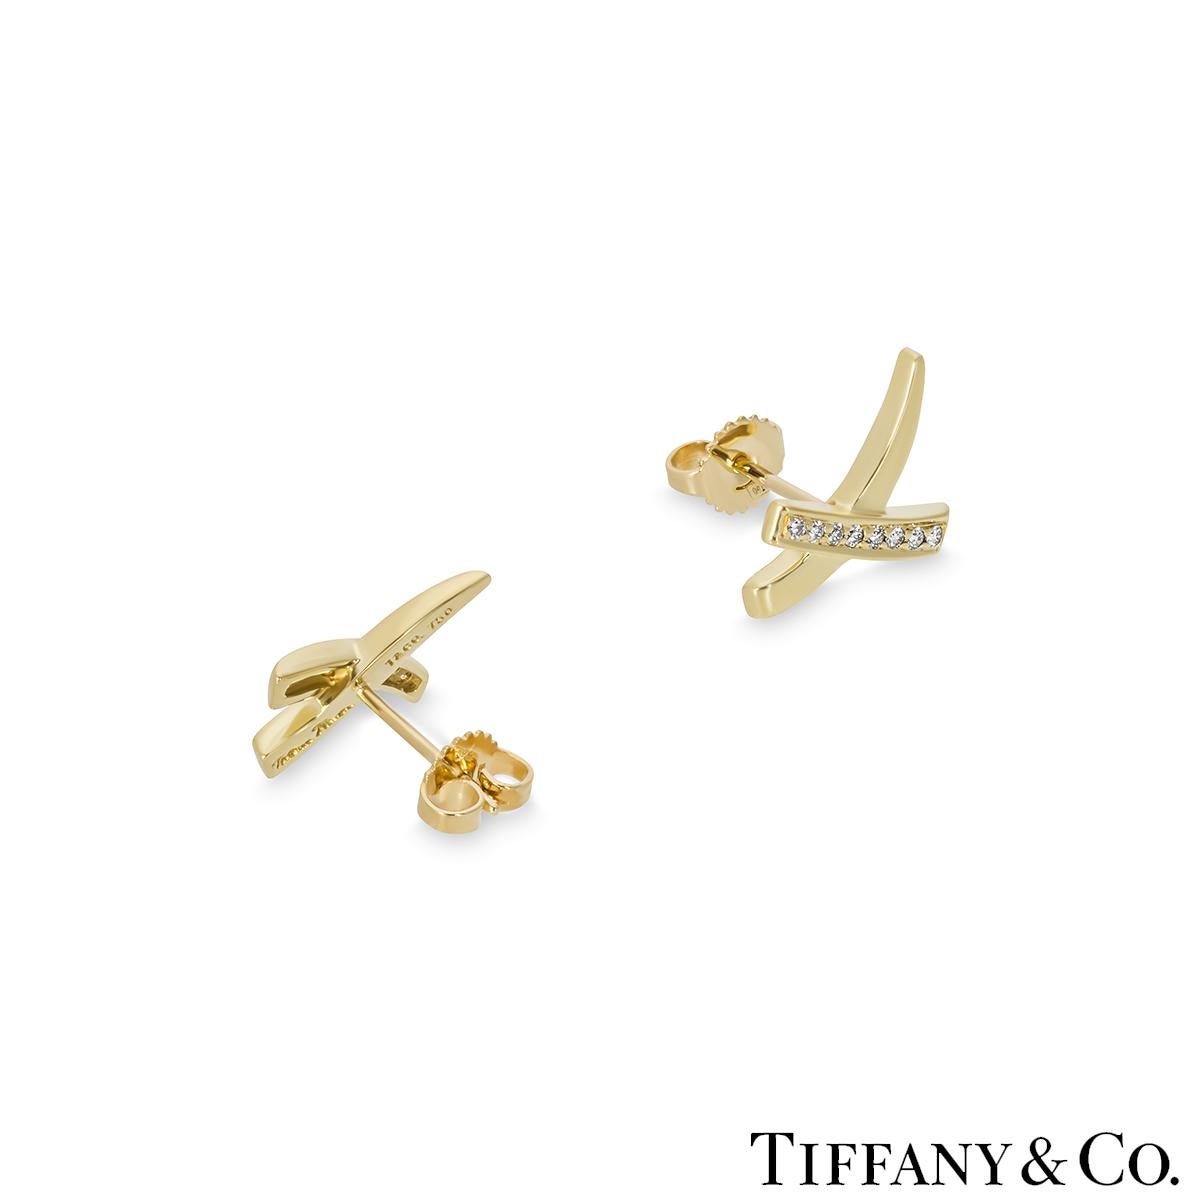 Tiffany & Co. Yellow Gold Diamond Graffiti X Earrings & Ring Suite In Excellent Condition For Sale In London, GB